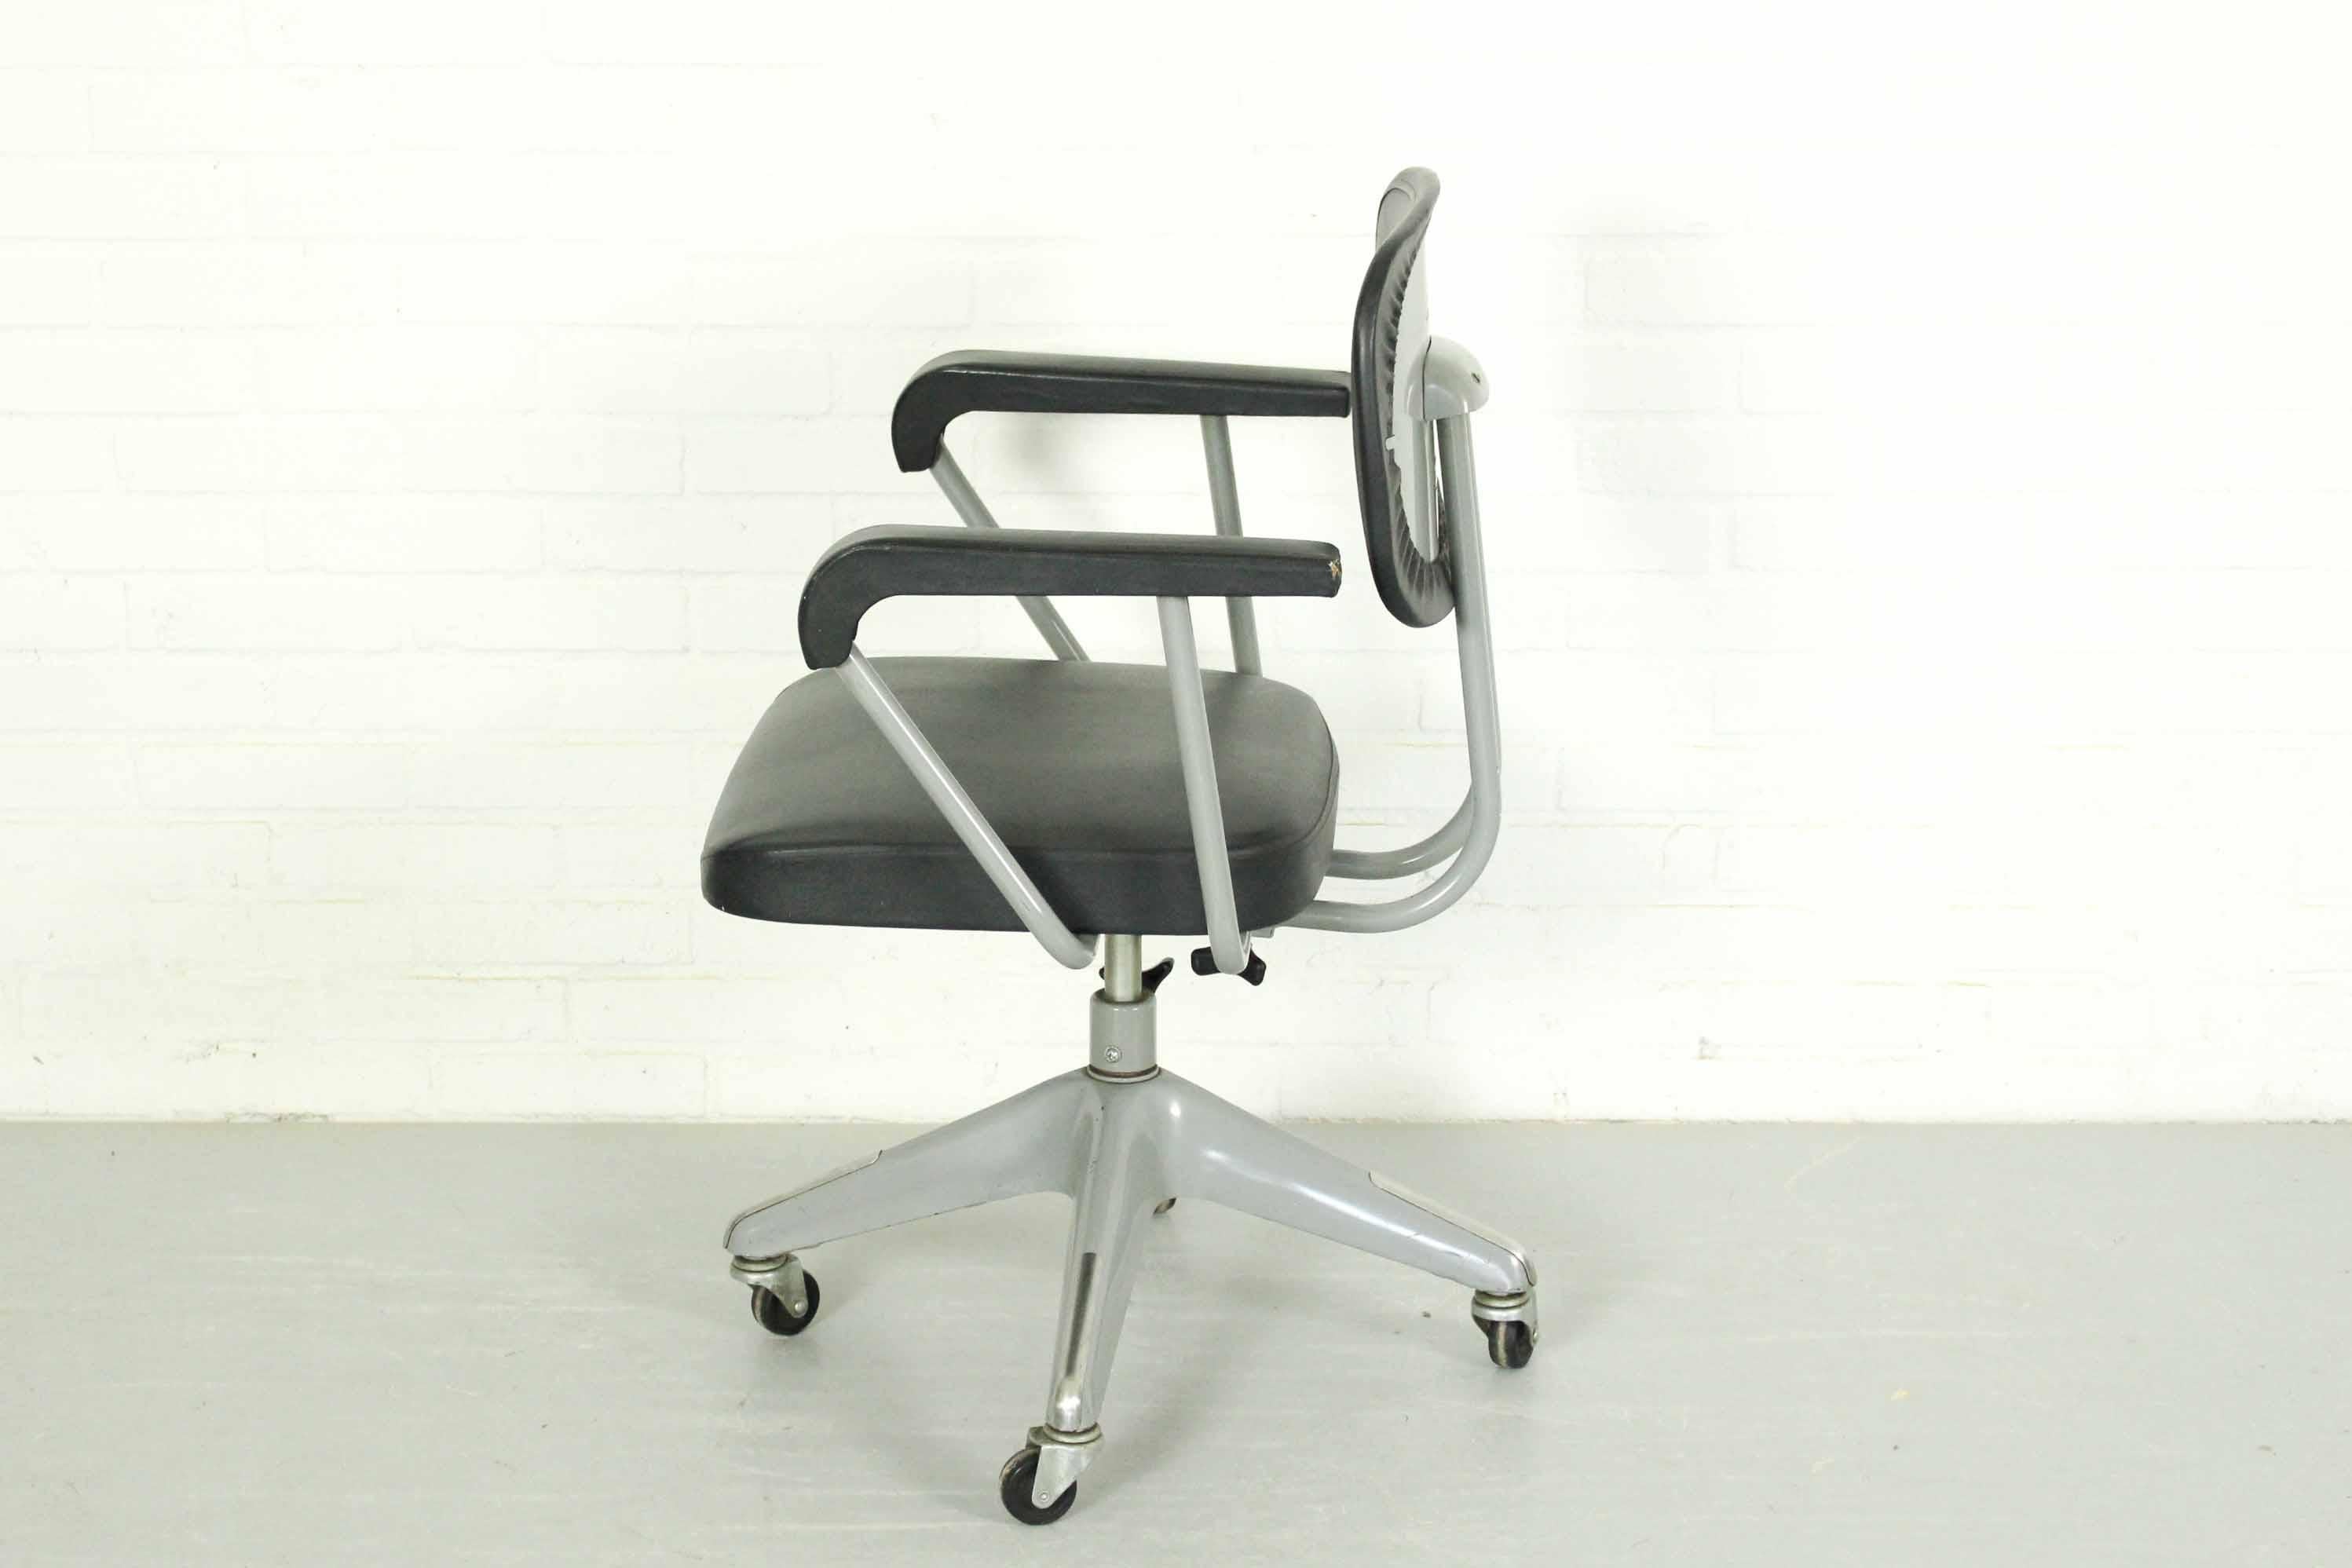 20th Century Japanese Industrial Office Desk Chair by Takashi Okamura, 1950s